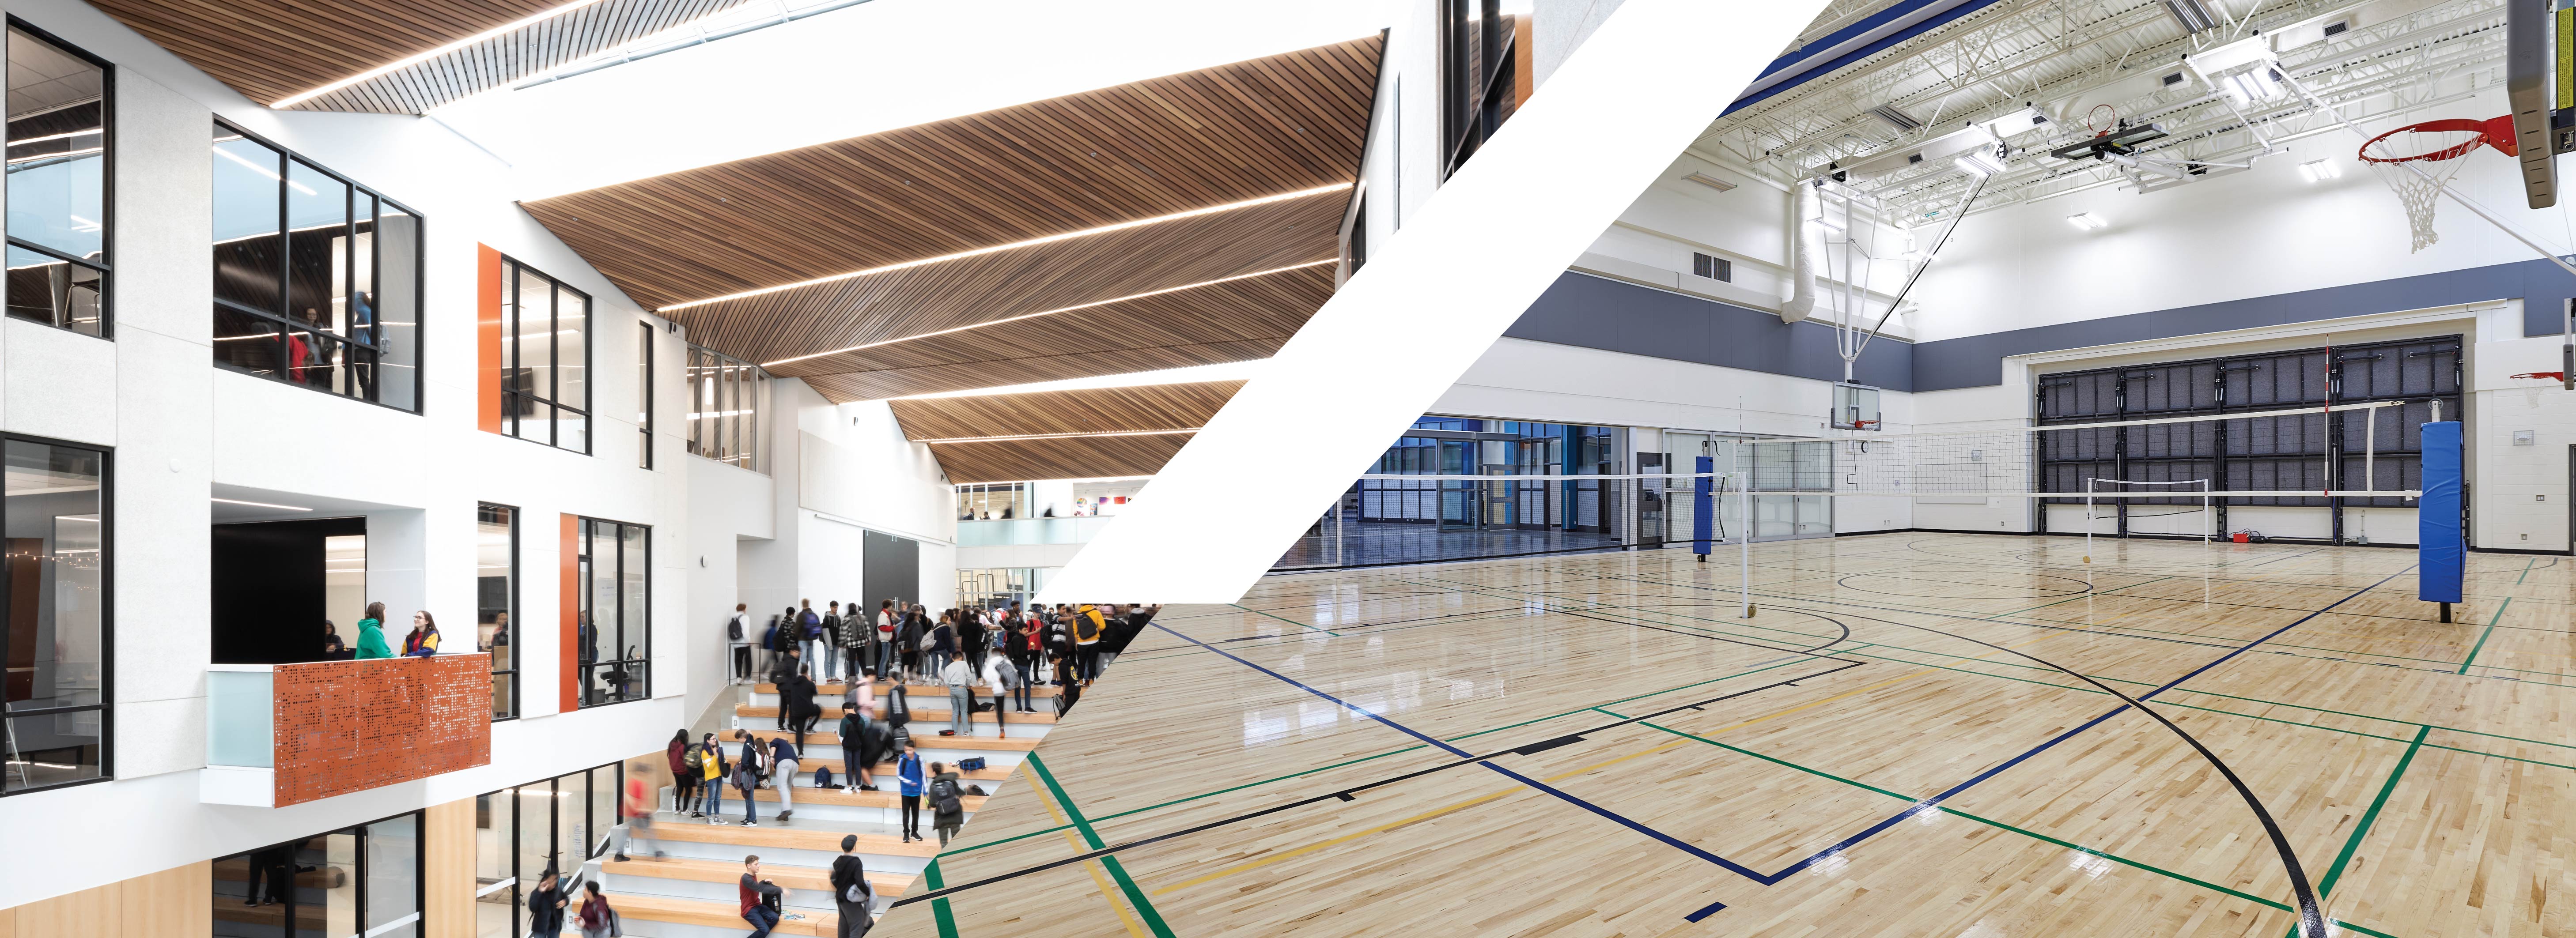 High school lobby with stairs and students and a High school gym with a basketball net